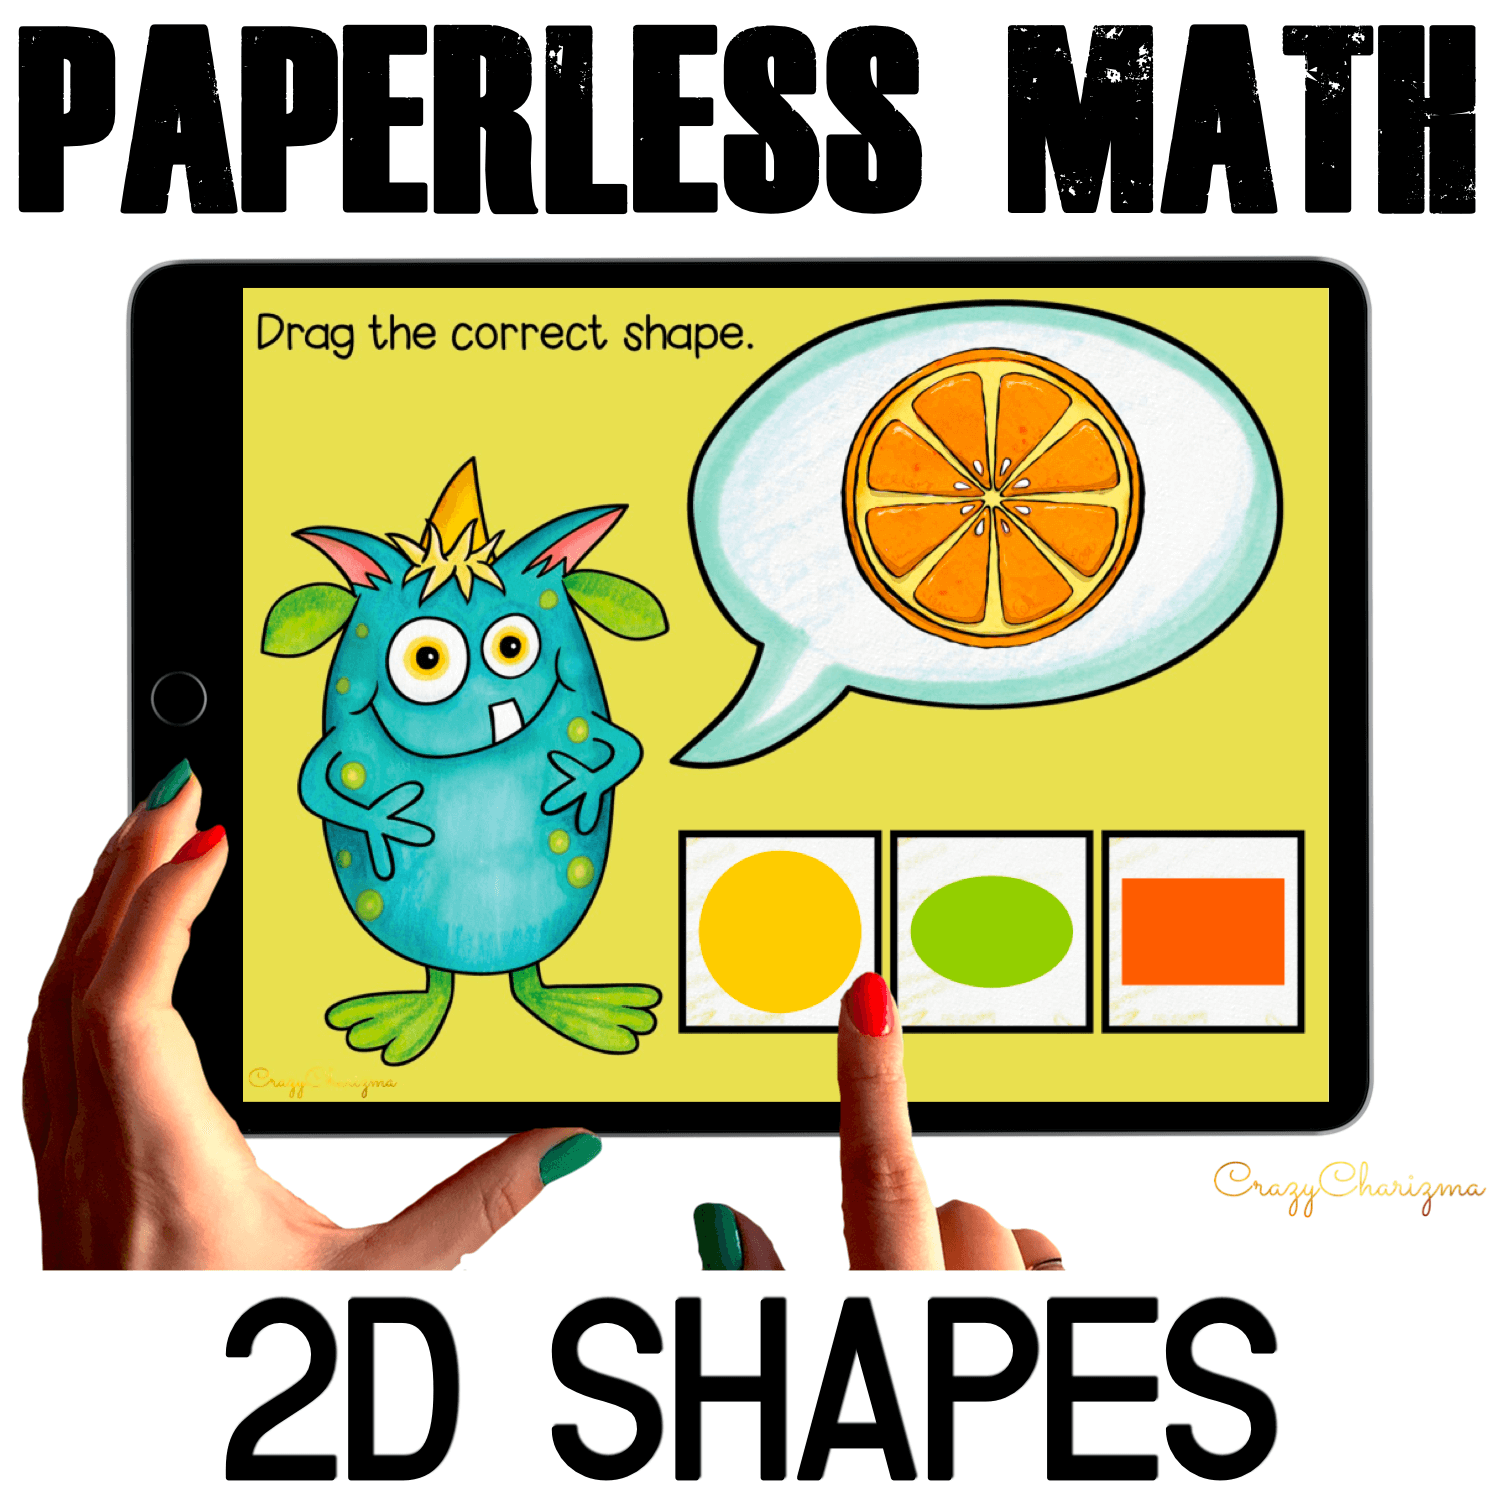 Need engaging 2D shapes activities? Have fun with this Google Slides set. Perfect to use for centers, assessment, independent practice, early finishers, homework, group work, as well as during distance learning or hybrid.